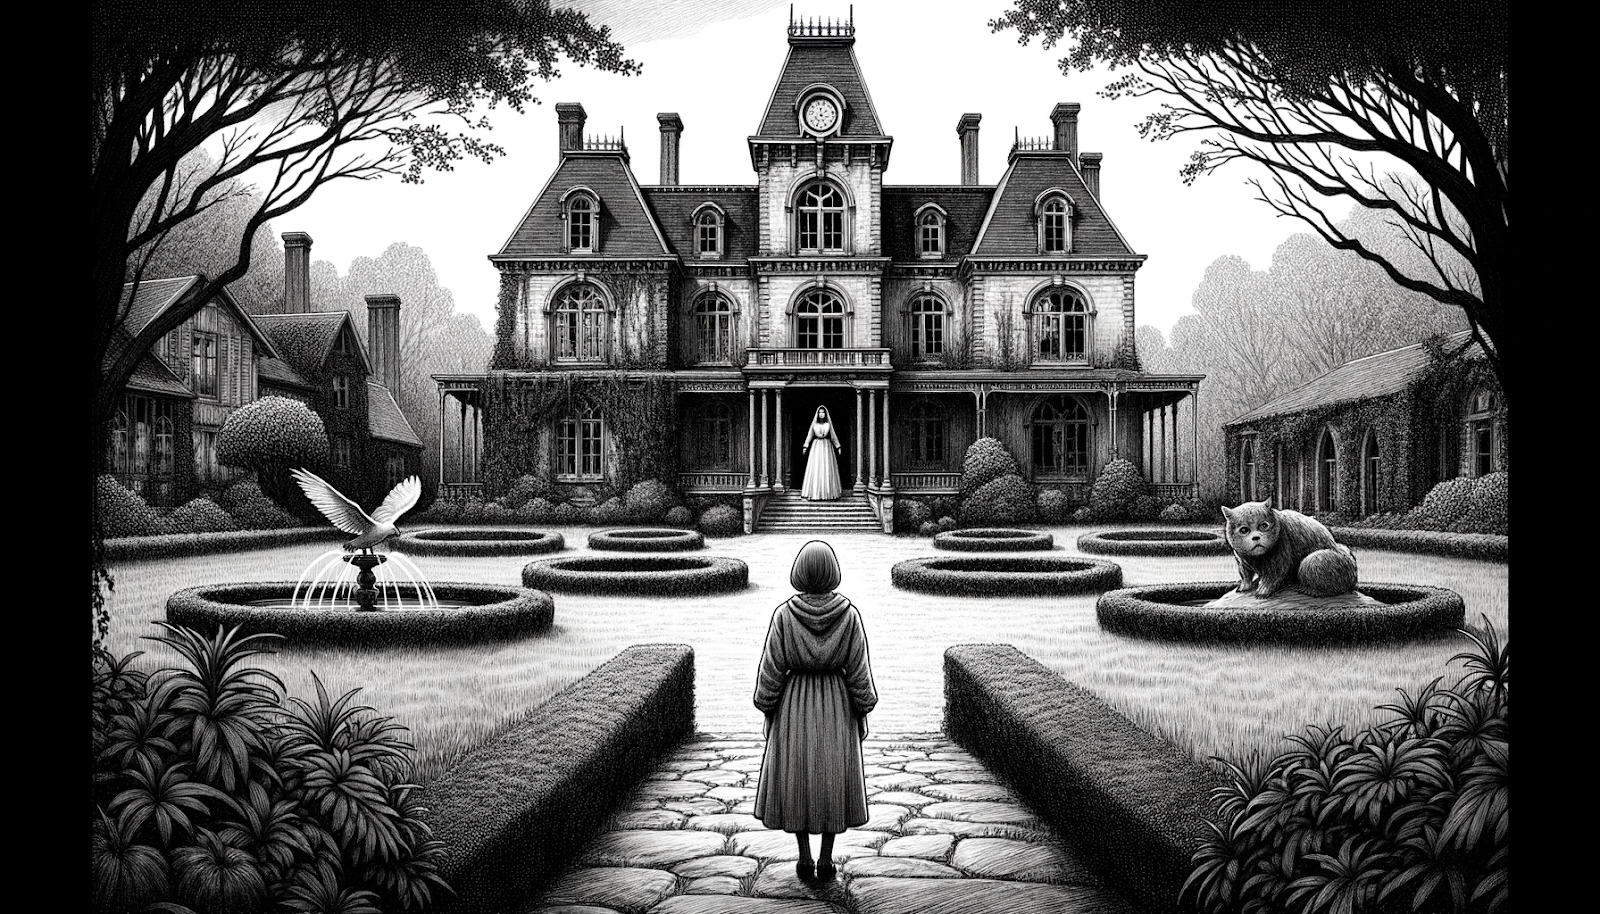 Illustration of Jenna standing before an imposing, yet neglected mansion. The sprawling estate gives off an aura of melancholy. The gardens are overgrown, and the entire setting feels eerie. Emerging from the mansion's entrance is Isabelle, the mysterious woman from the old photograph. They exchange a look of recognition, both holding a sense of sorrow and understanding.